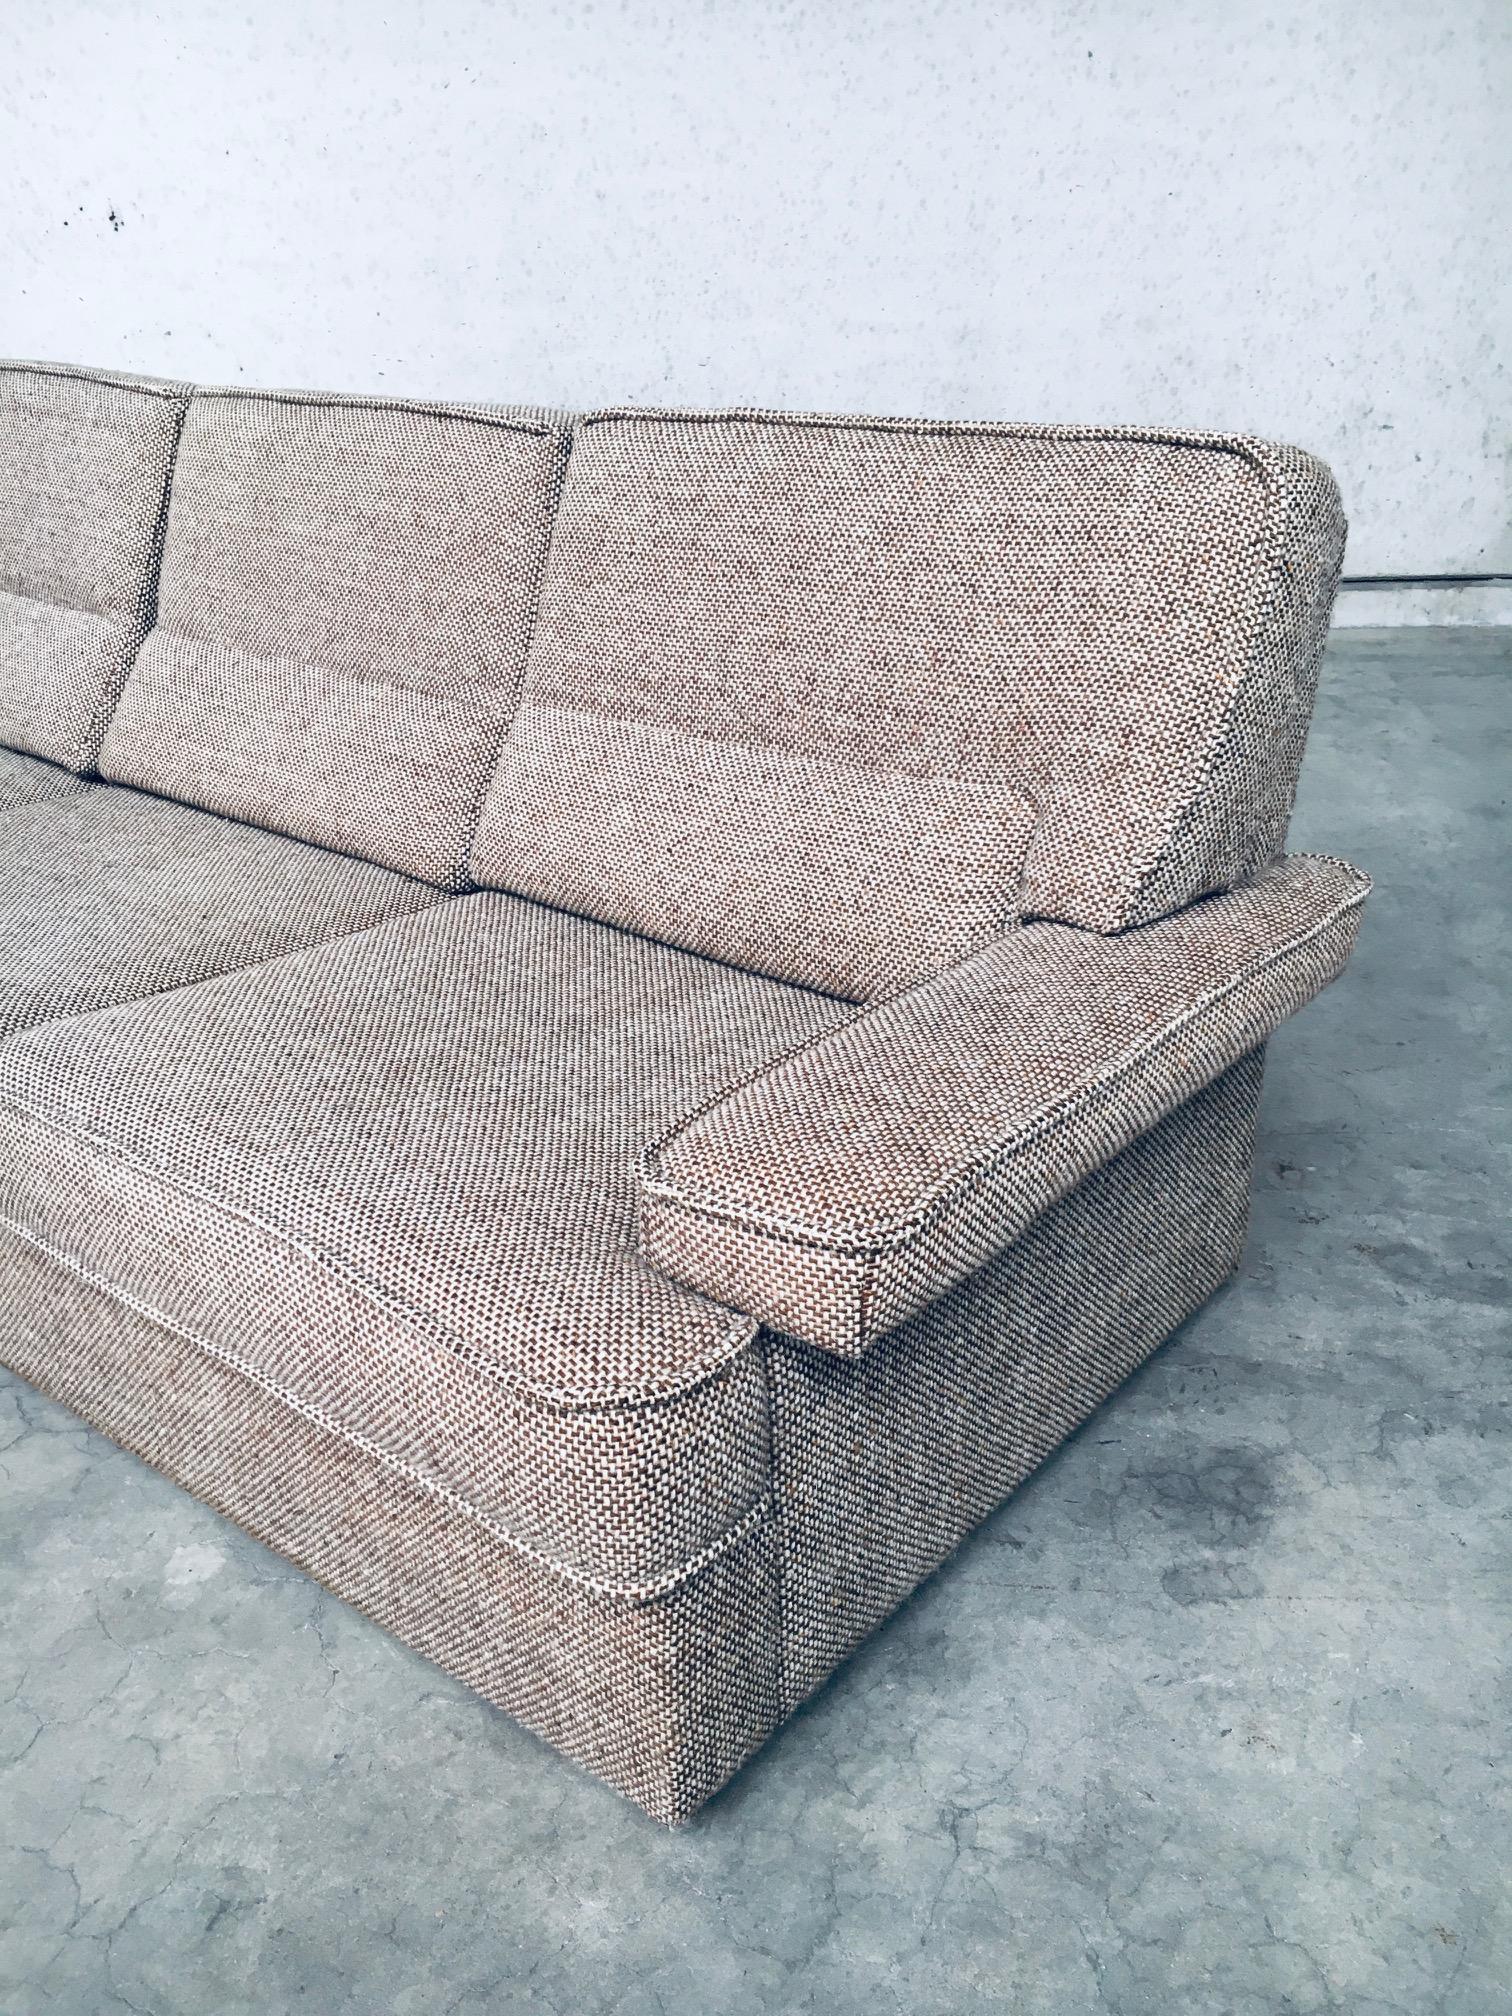 Midcentury Modern Design Boucle 3 Seat Sofa, Italy 1970's For Sale 2